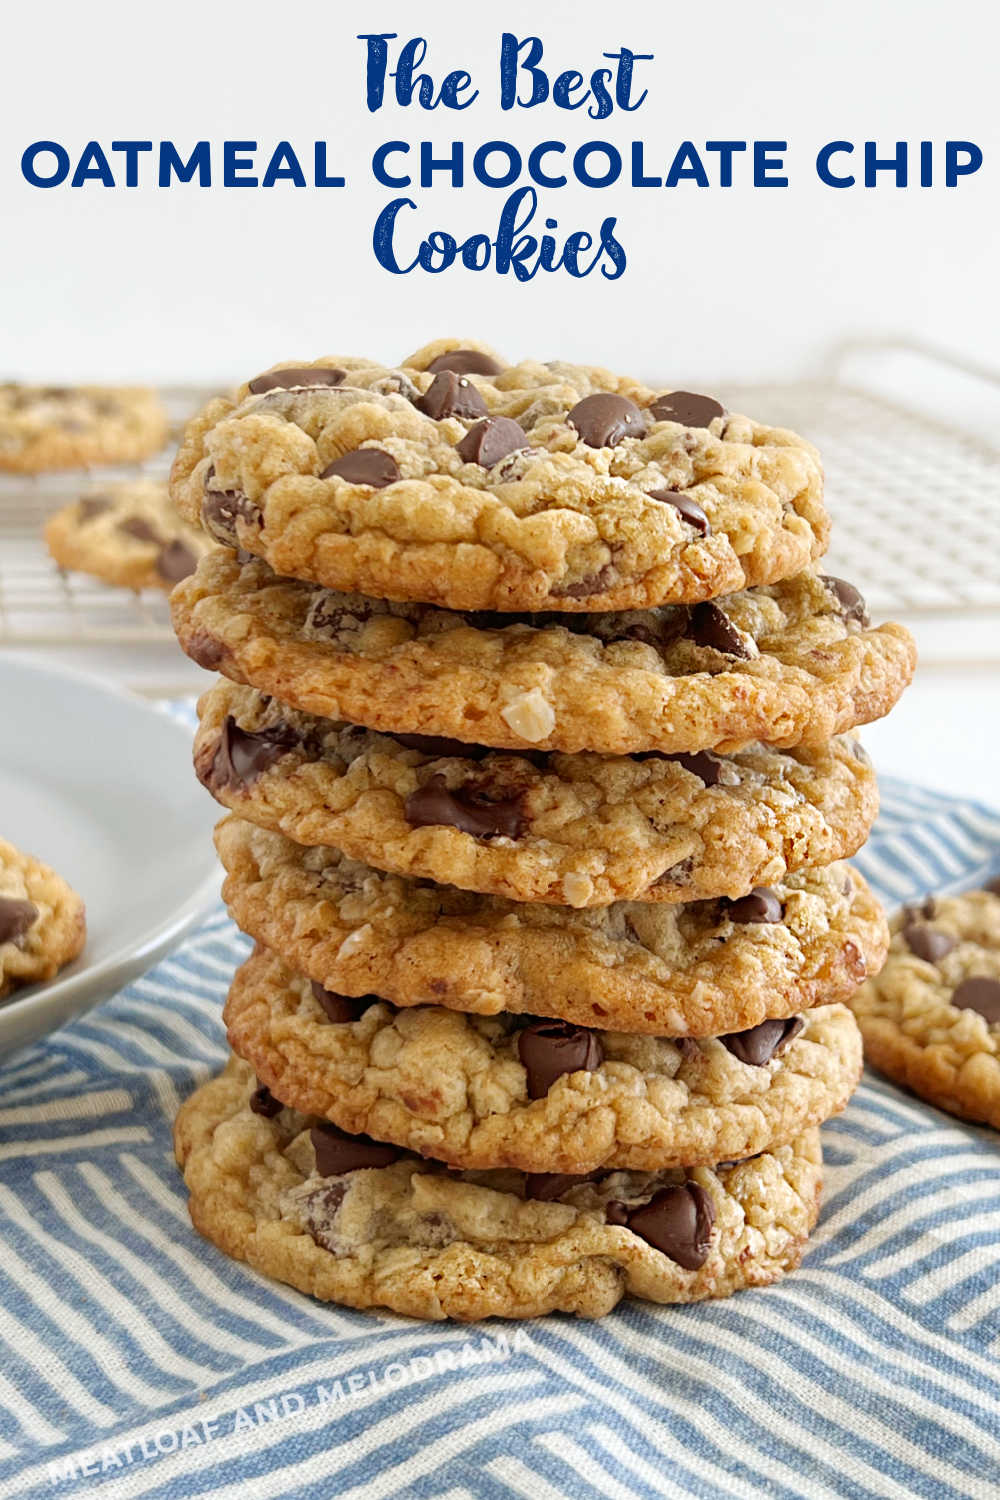 The Best Oatmeal Chocolate Chip Cookies recipe makes chewy cookies with rolled oats, chocolate chips, a hint of cinnamon and lots of love! These homemade oatmeal cookies are seriously the best! via @meamel